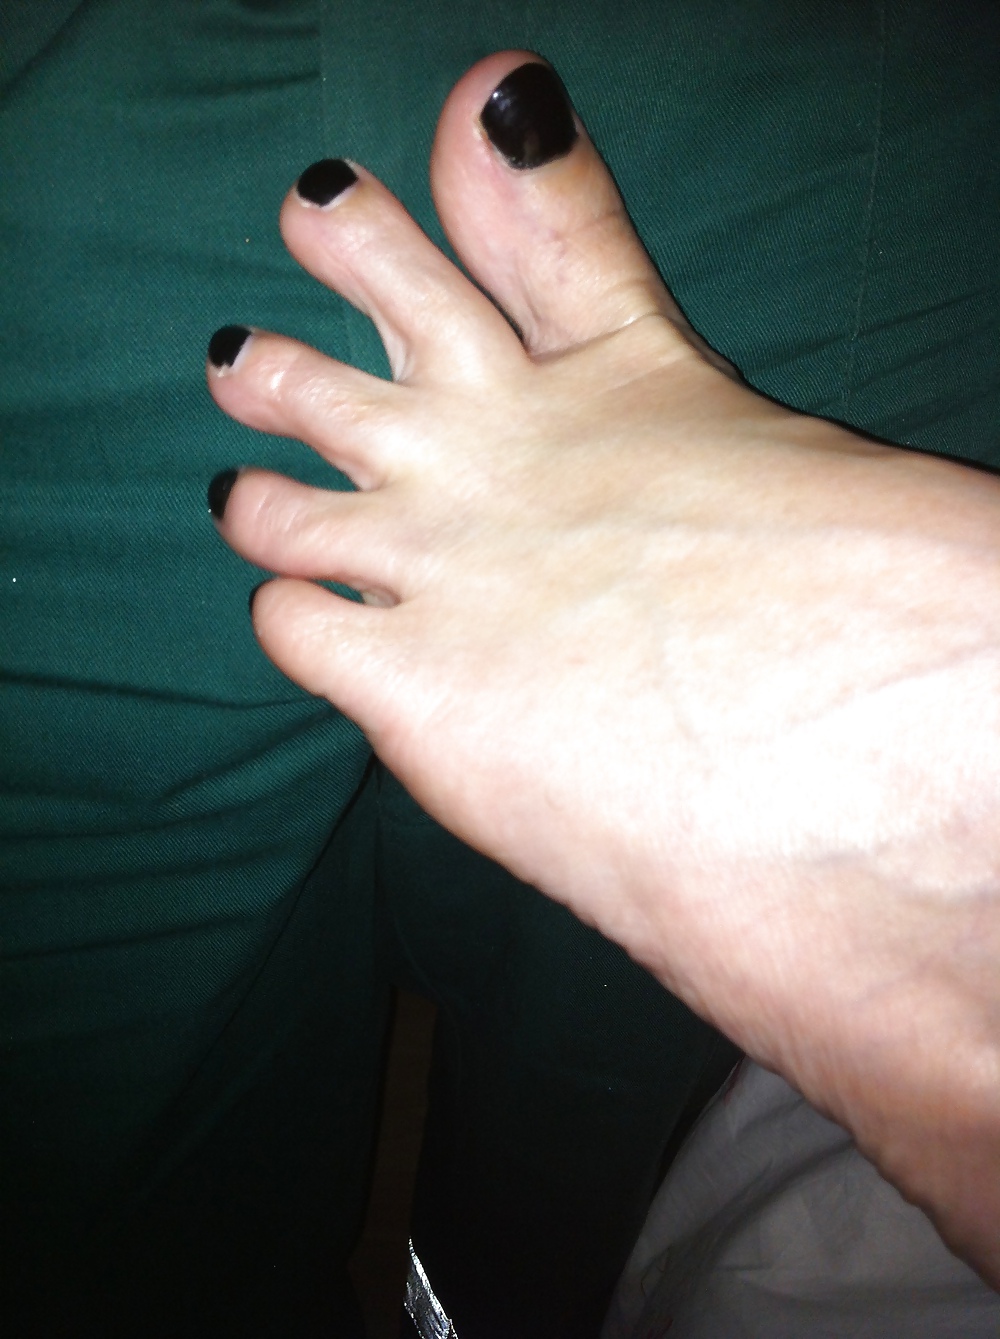 A little foot tease before i sadly had to go to work #9252413